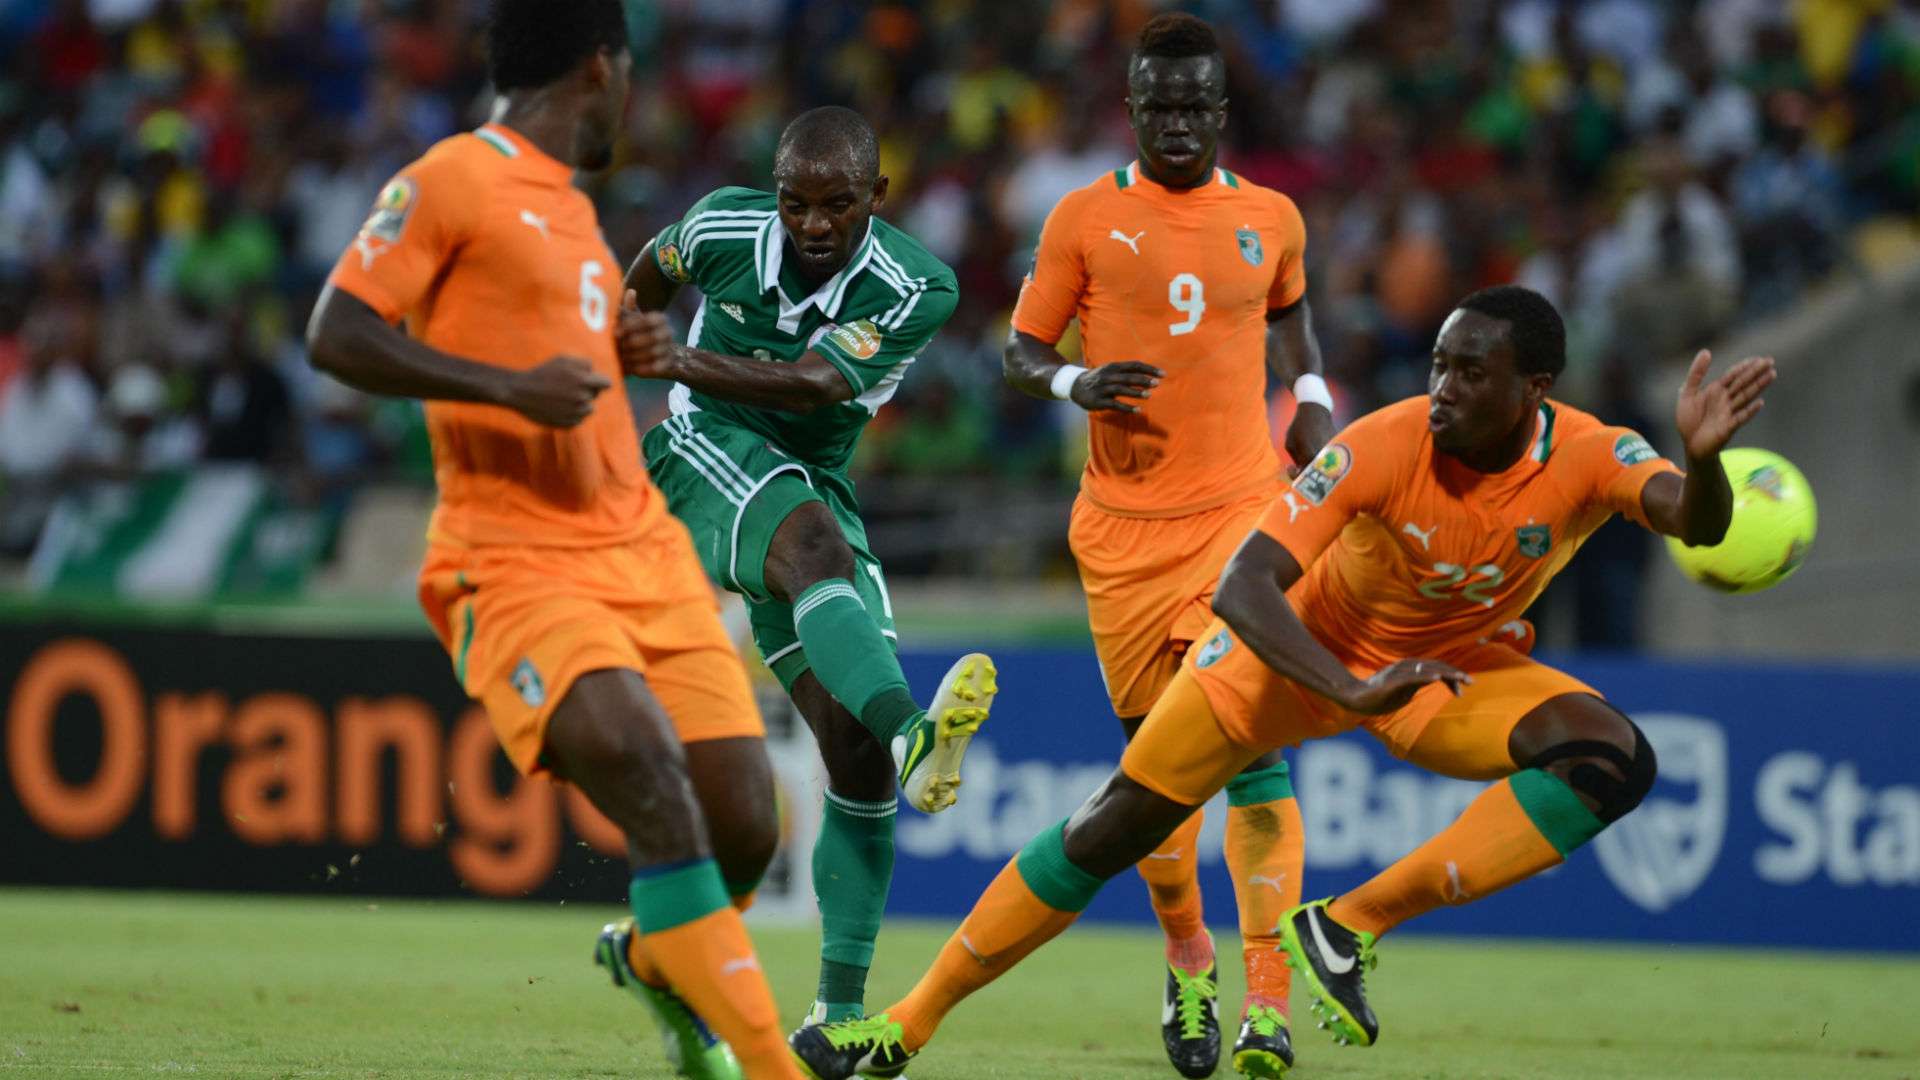 Sunday Mba scores winning goal against Cote d'Ivoire at Afcon 2013